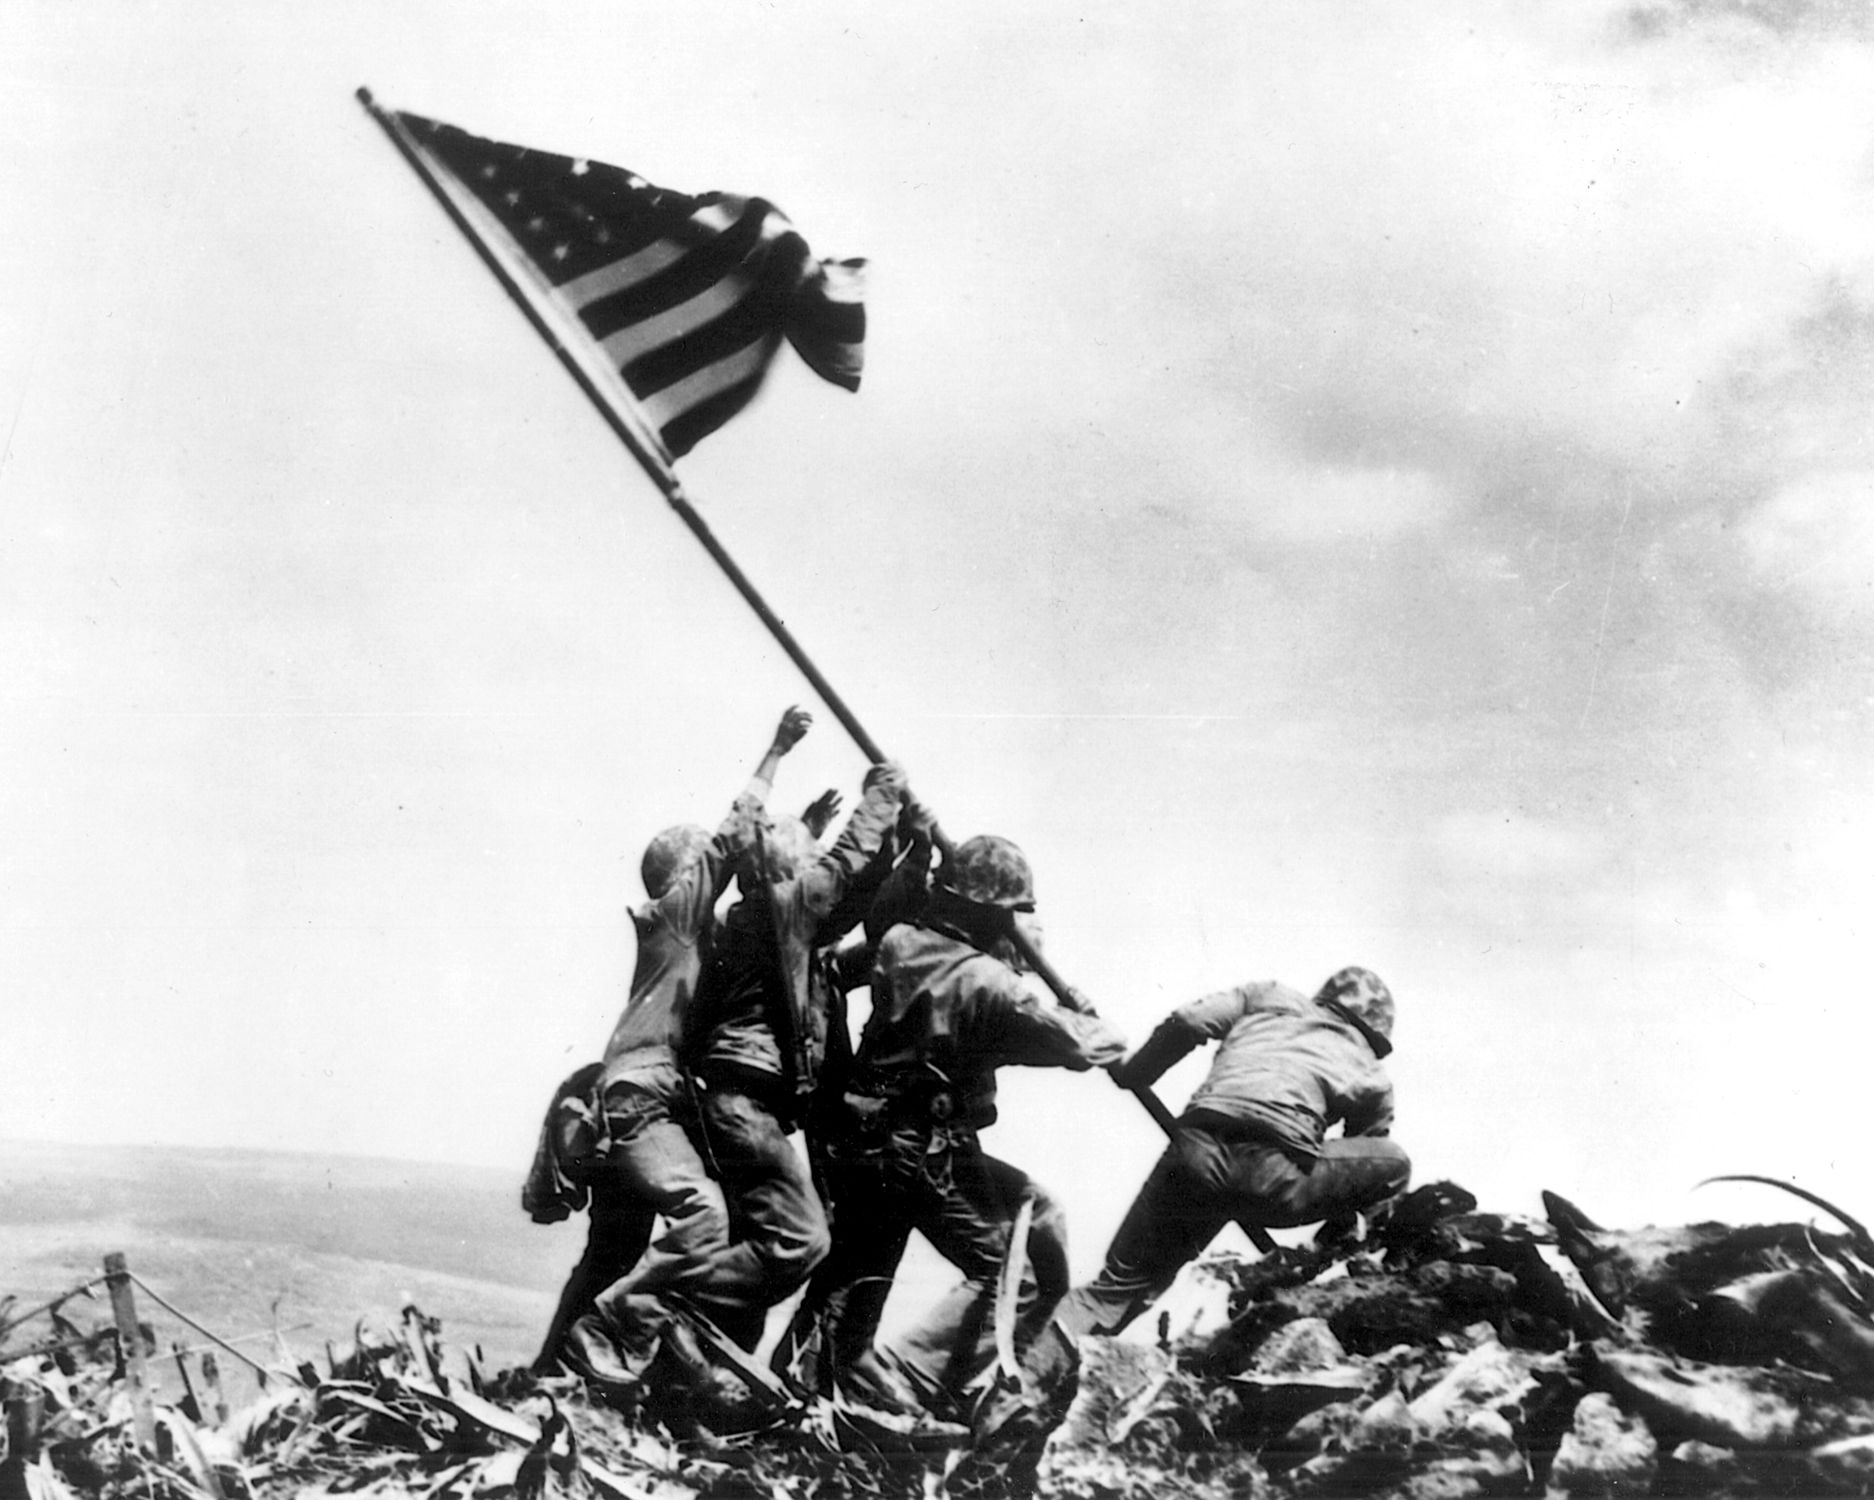 The famous photo of the flag raising atop Mount Suribachi on Iwo Jima was captured almost by chance when the shutter of AP photographer Joe Rosenthal clicked. The image remains an enduring legacy of World War II. 